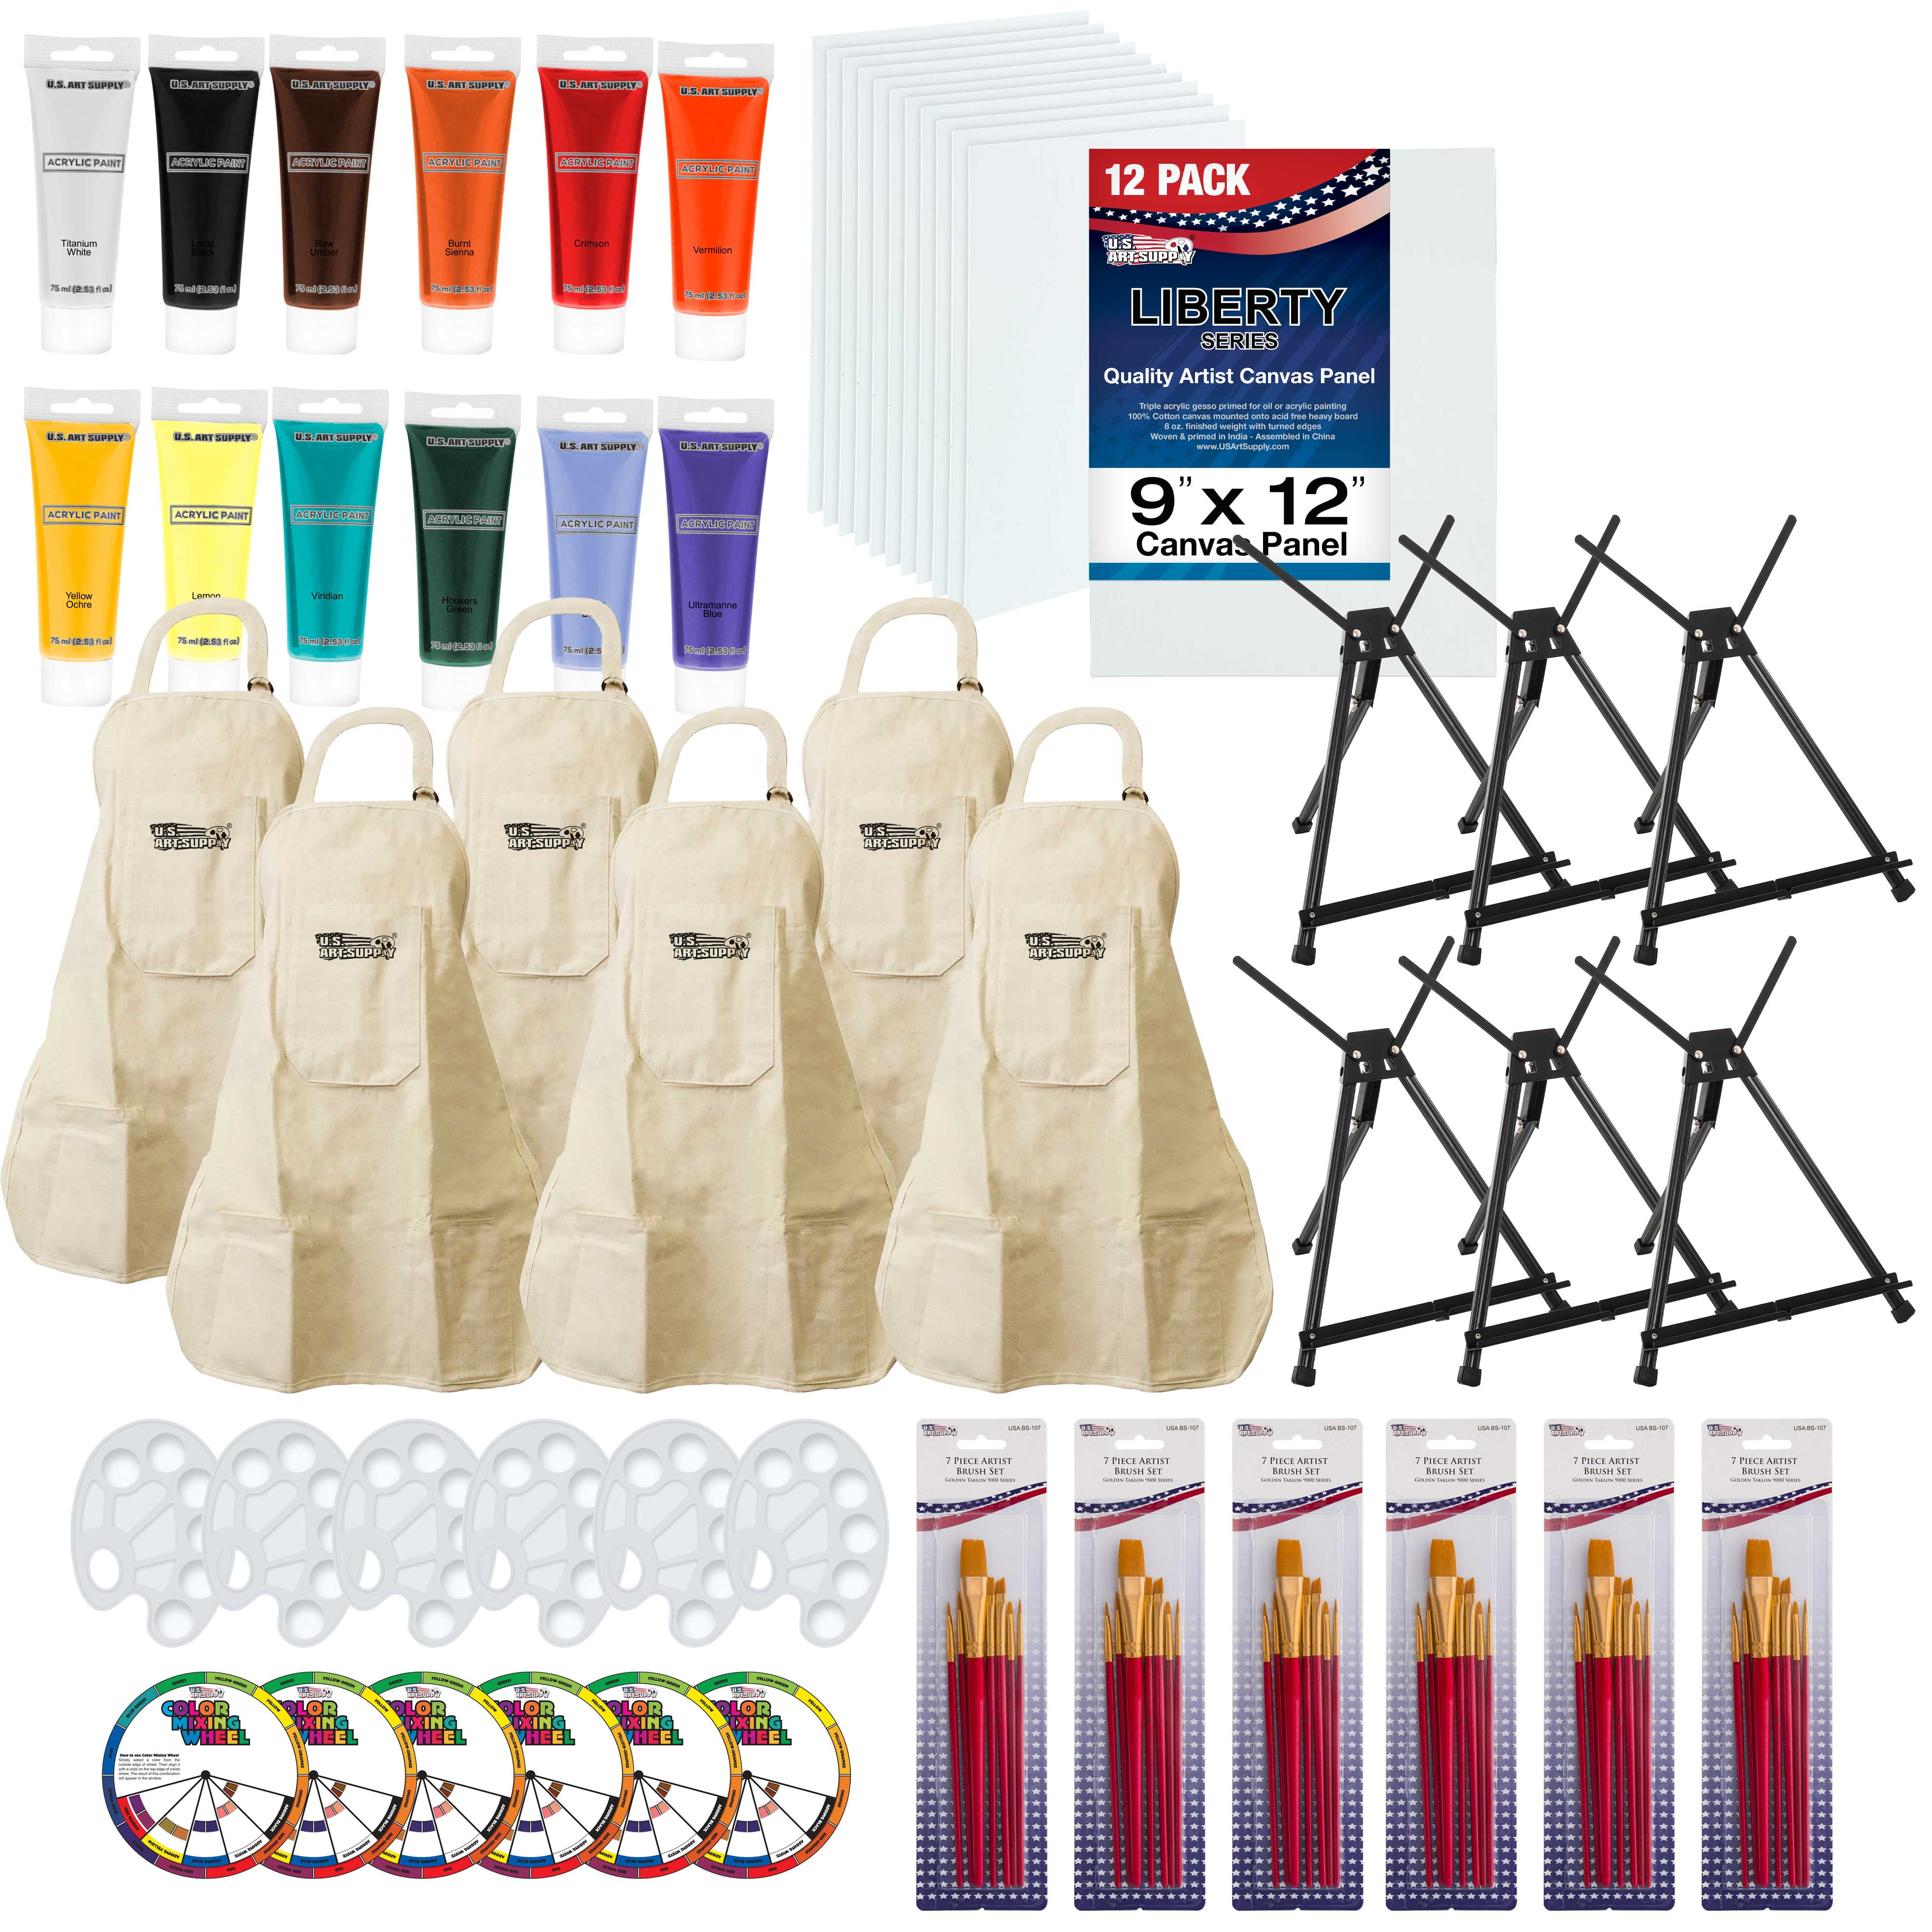 U.S. Art Supply Paint and Sip Art Party Painting Kit - 6 Easels, 12 Paint  Tube Set, 12 Canvas Panels, 6 Brush Sets & 6 Aprons 